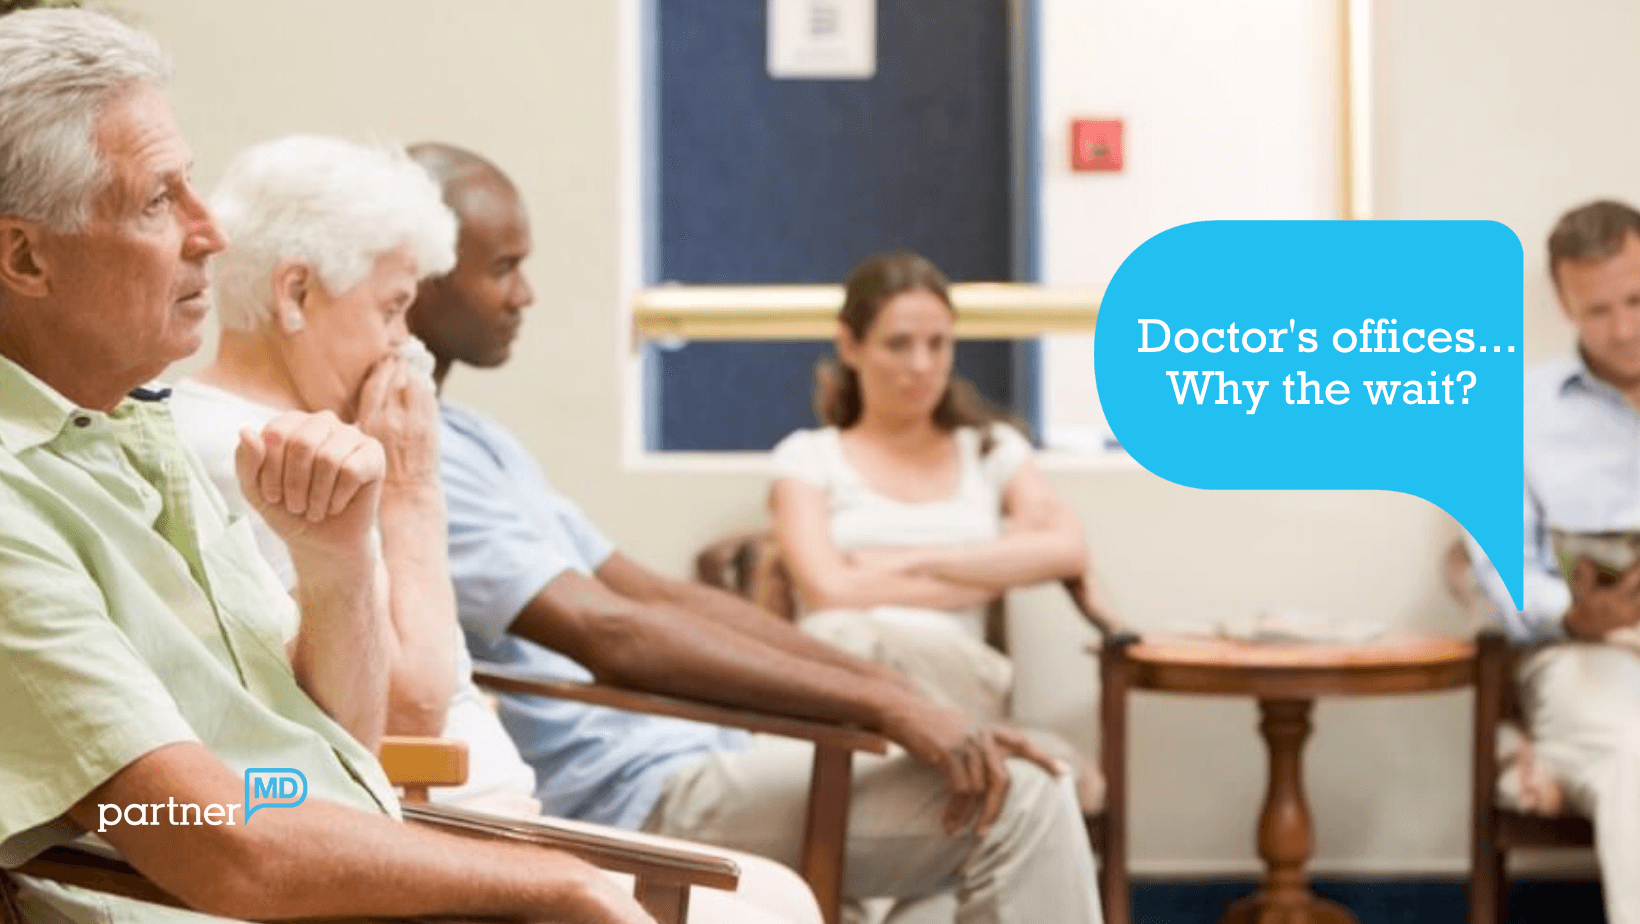 Why Do You Wait So Long at Doctor's Offices?